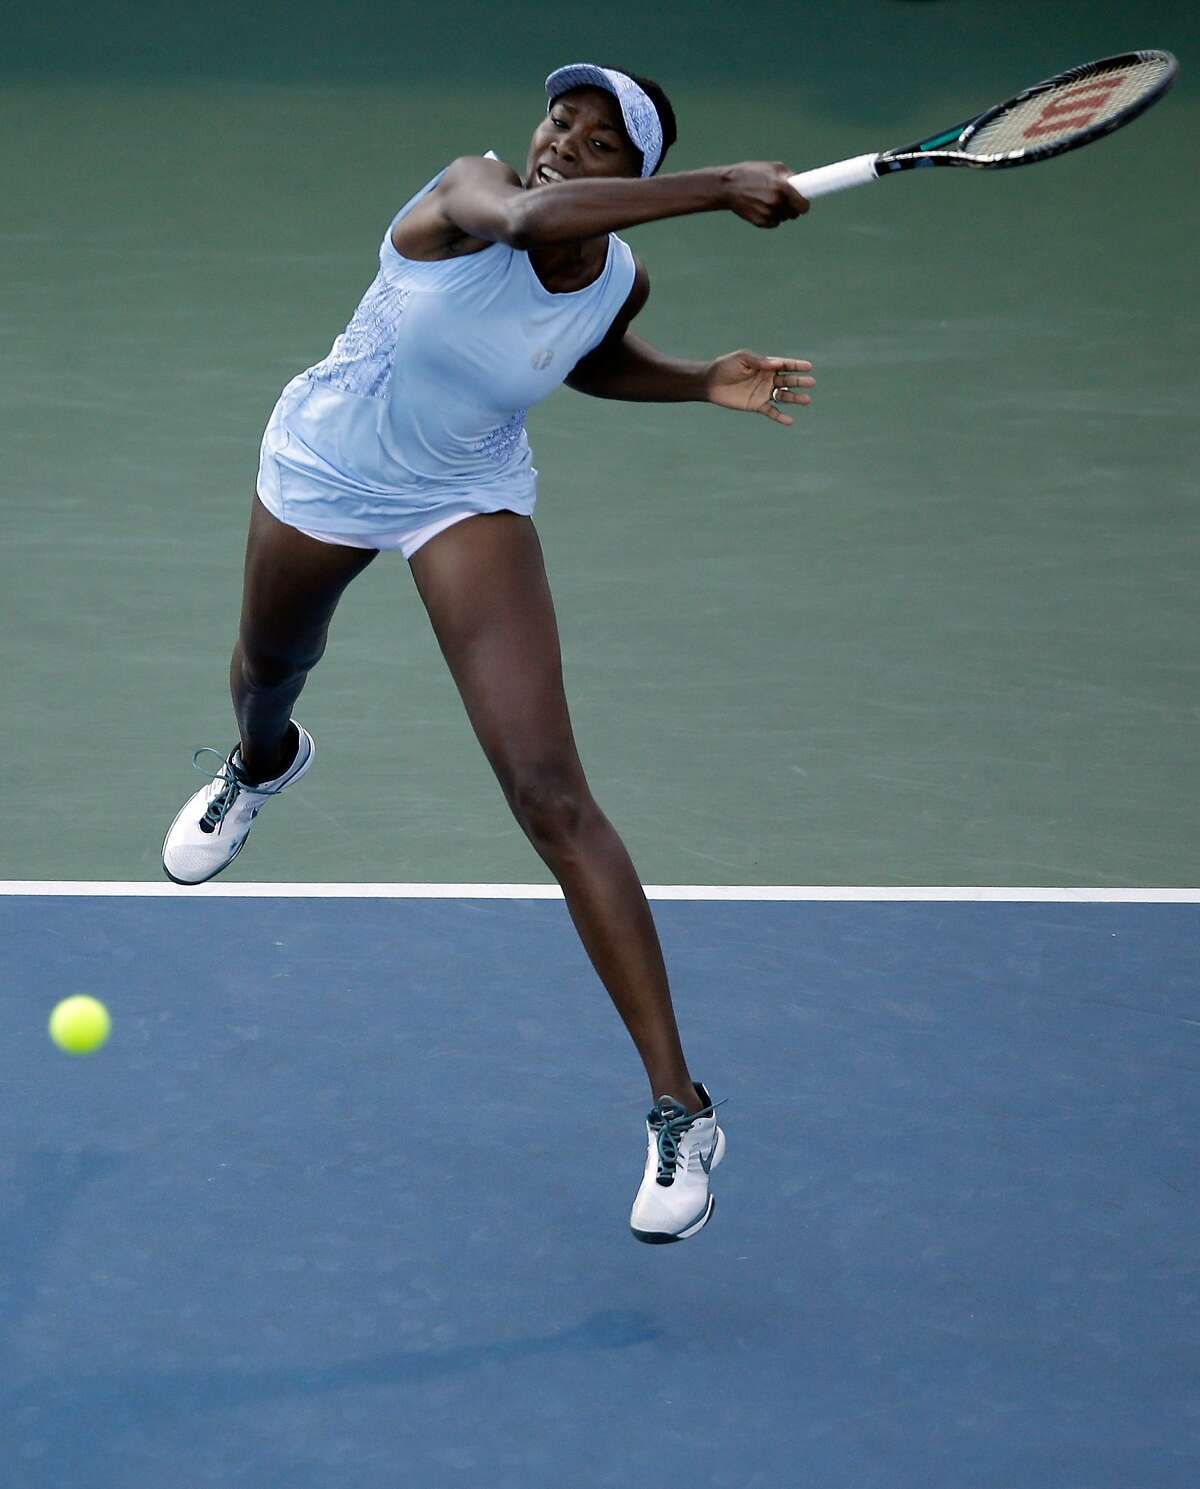 STANFORD, CA - JULY 29: Venus Williams returns a shot to Paula Kania of Poland during Day 2 of the Bank of the West Classic at the Taube Family Tennis Stadium on July 29, 2014 in Stanford, California. (Photo by Ezra Shaw/Getty Images)